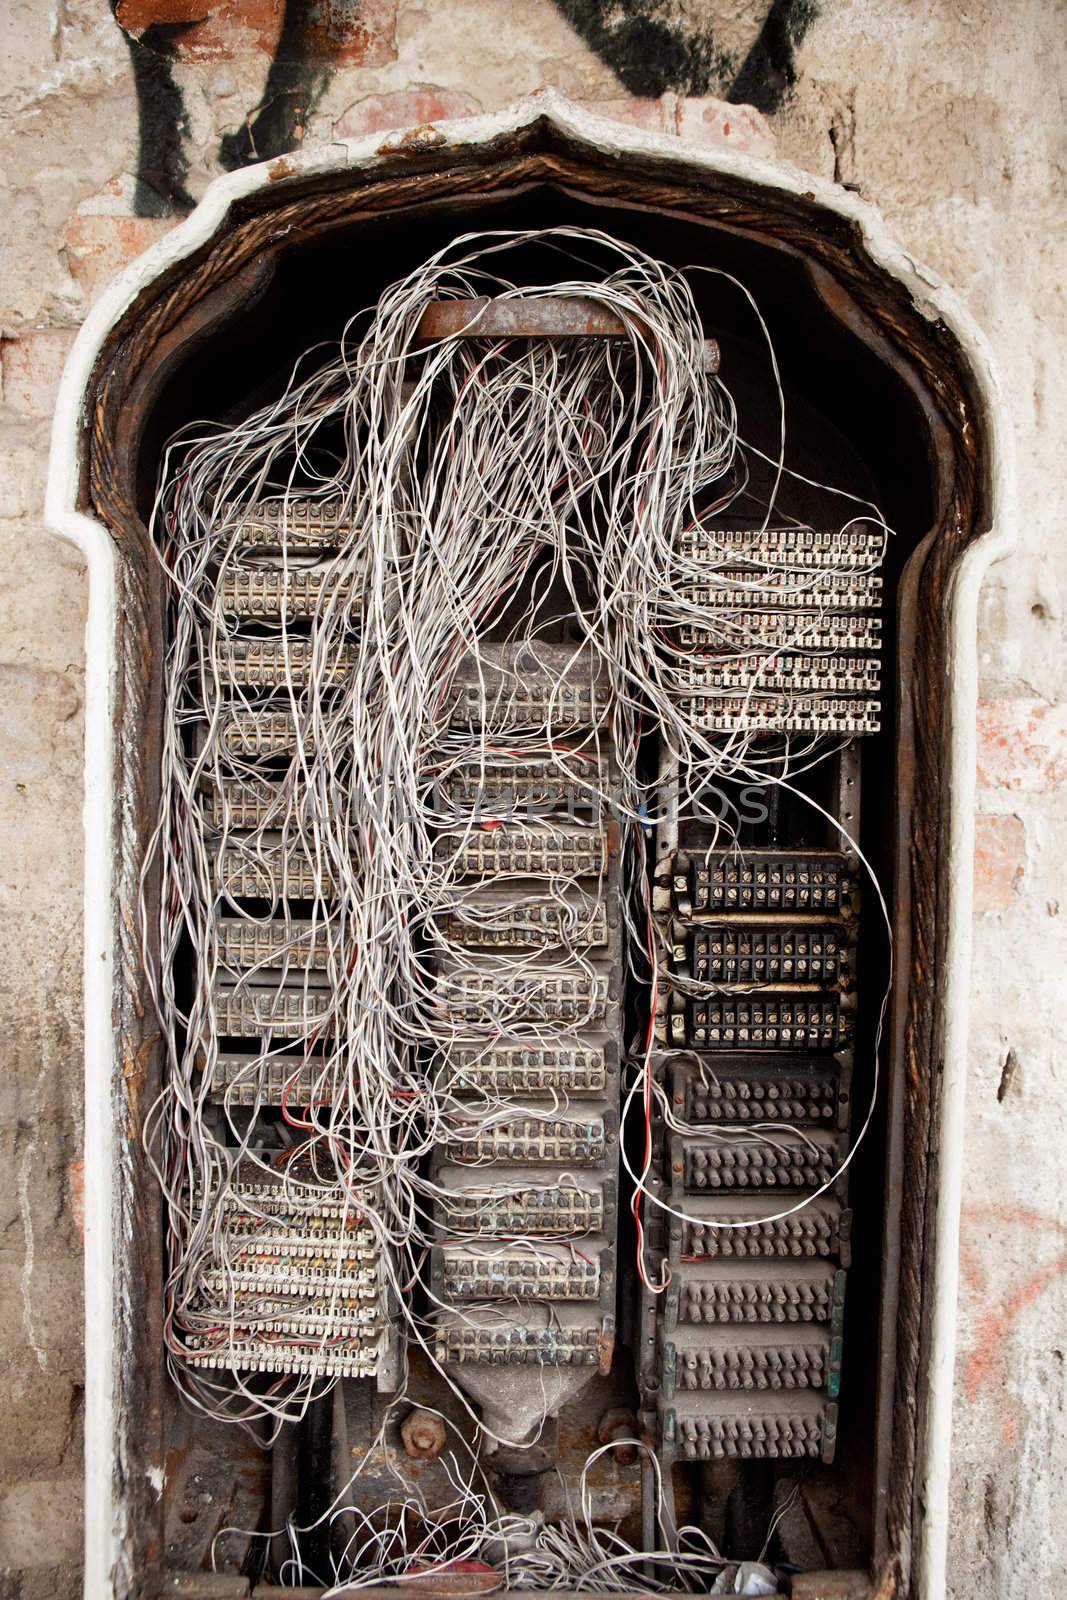 An old telephone central box with many wires exposed